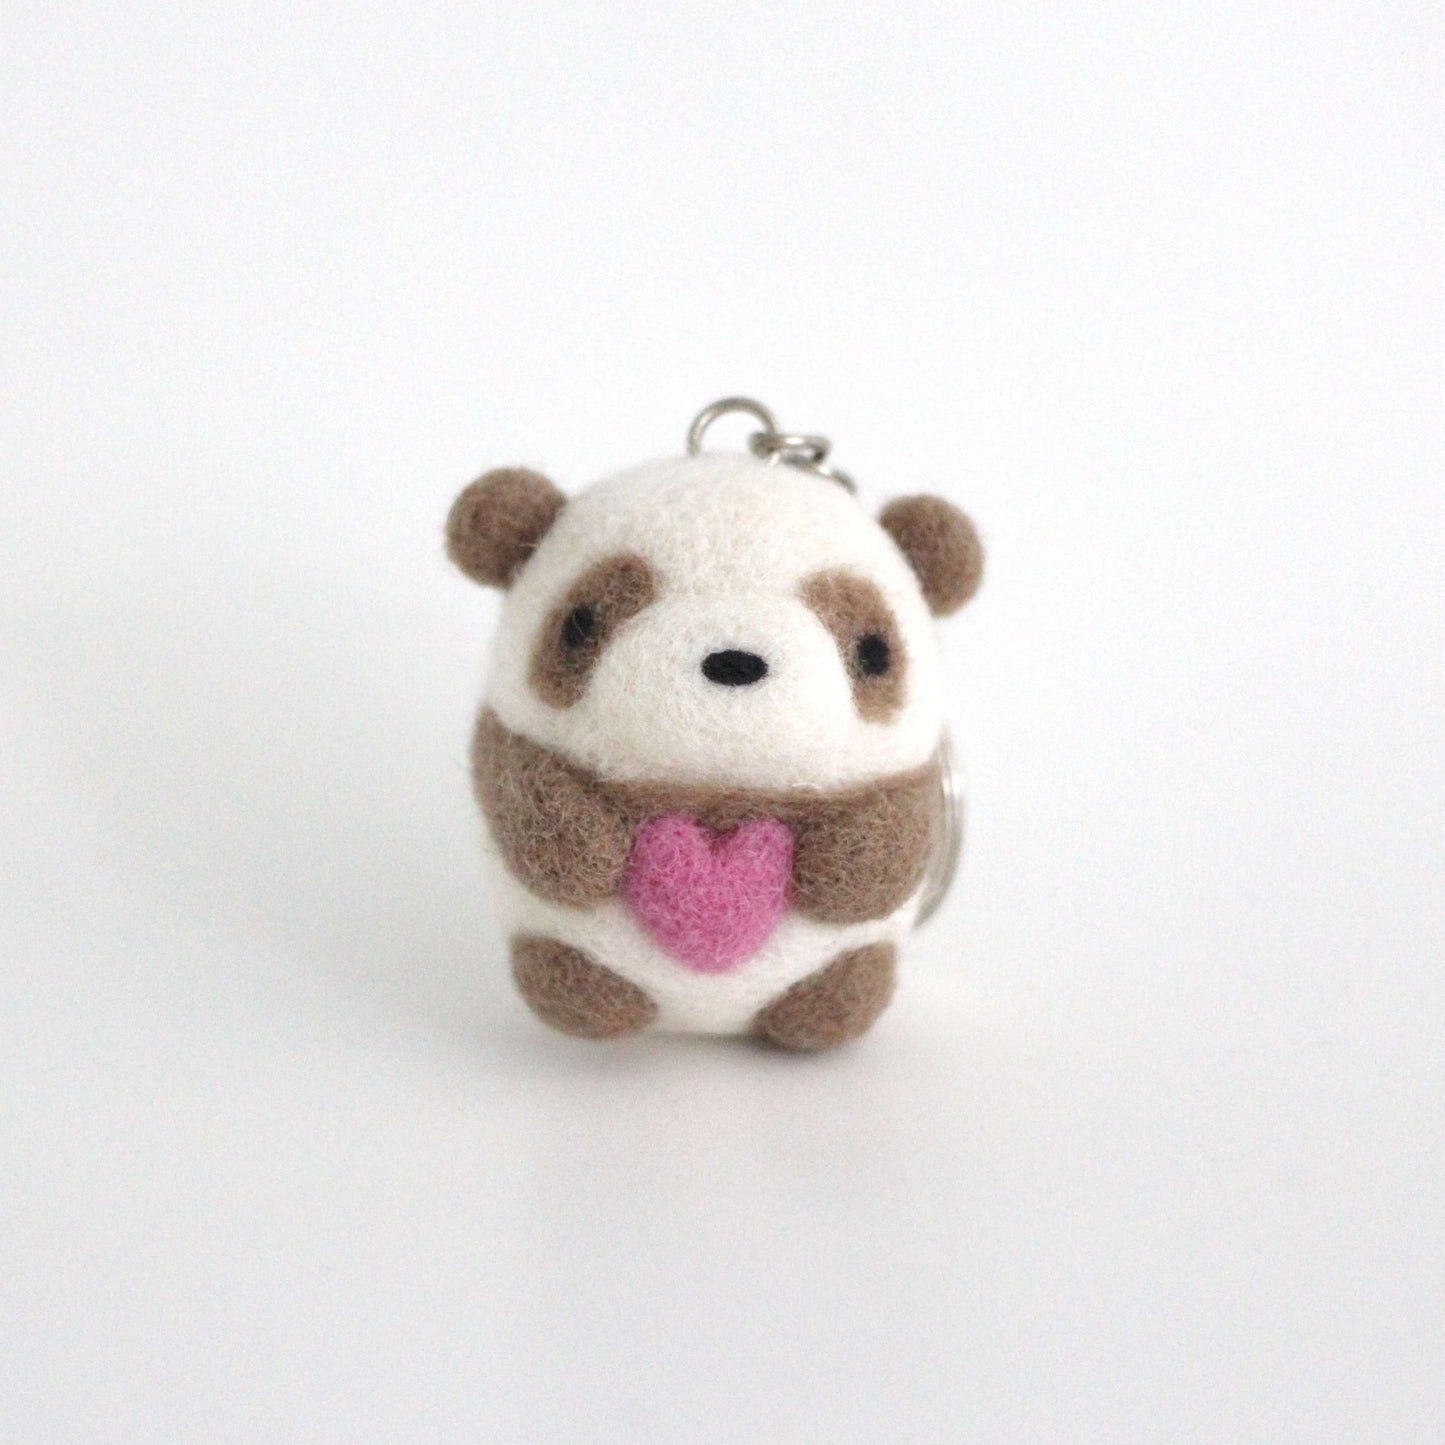 Needle Felted Brown Panda Holding a Heart Keychain by Wild Whimsy Woolies